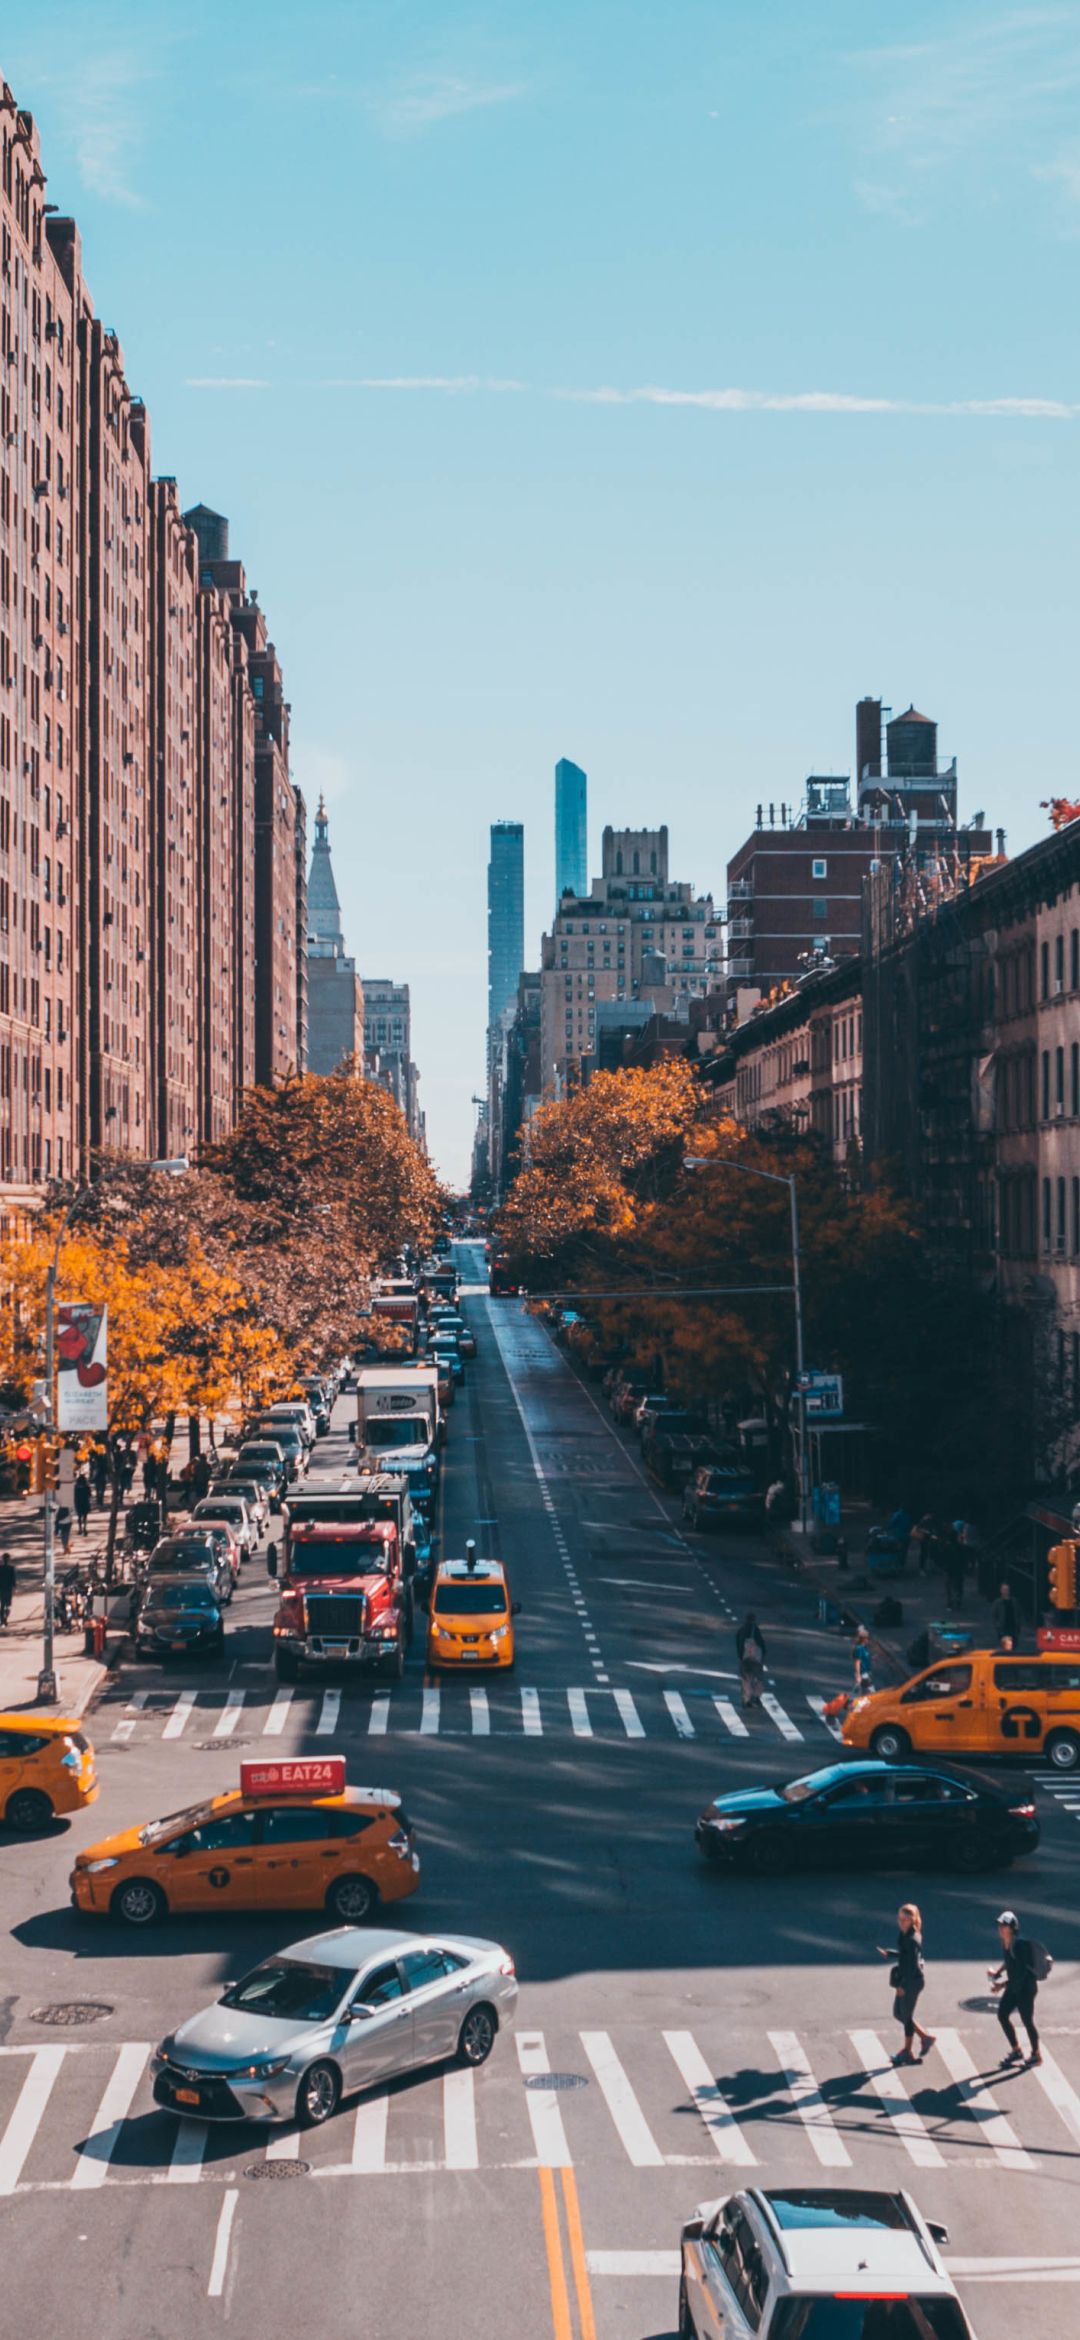 New York City Street Photography 1080x2340 Resolution Wallpaper, HD City 4K Wallpaper, Image, Photo and Background